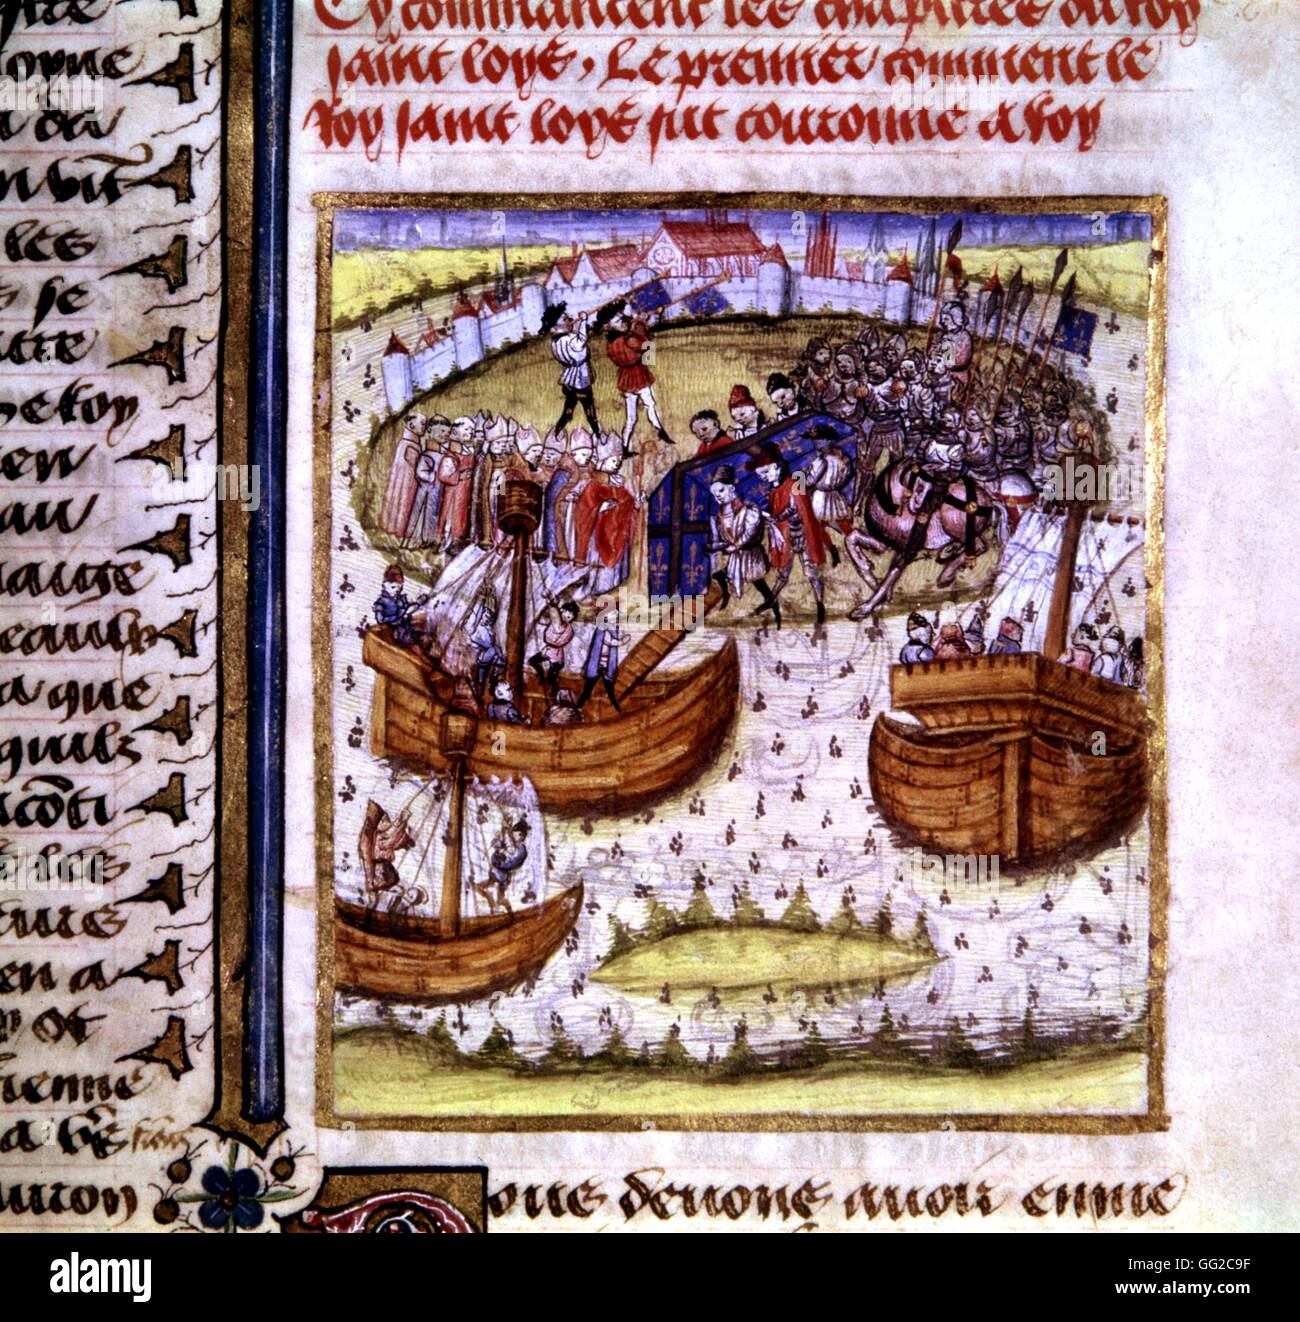 Great chronicles of France. Embarkation of St. Louis' coffin in Tunis c. 1450 France Bibliothèque municipale de Châteauroux Stock Photo